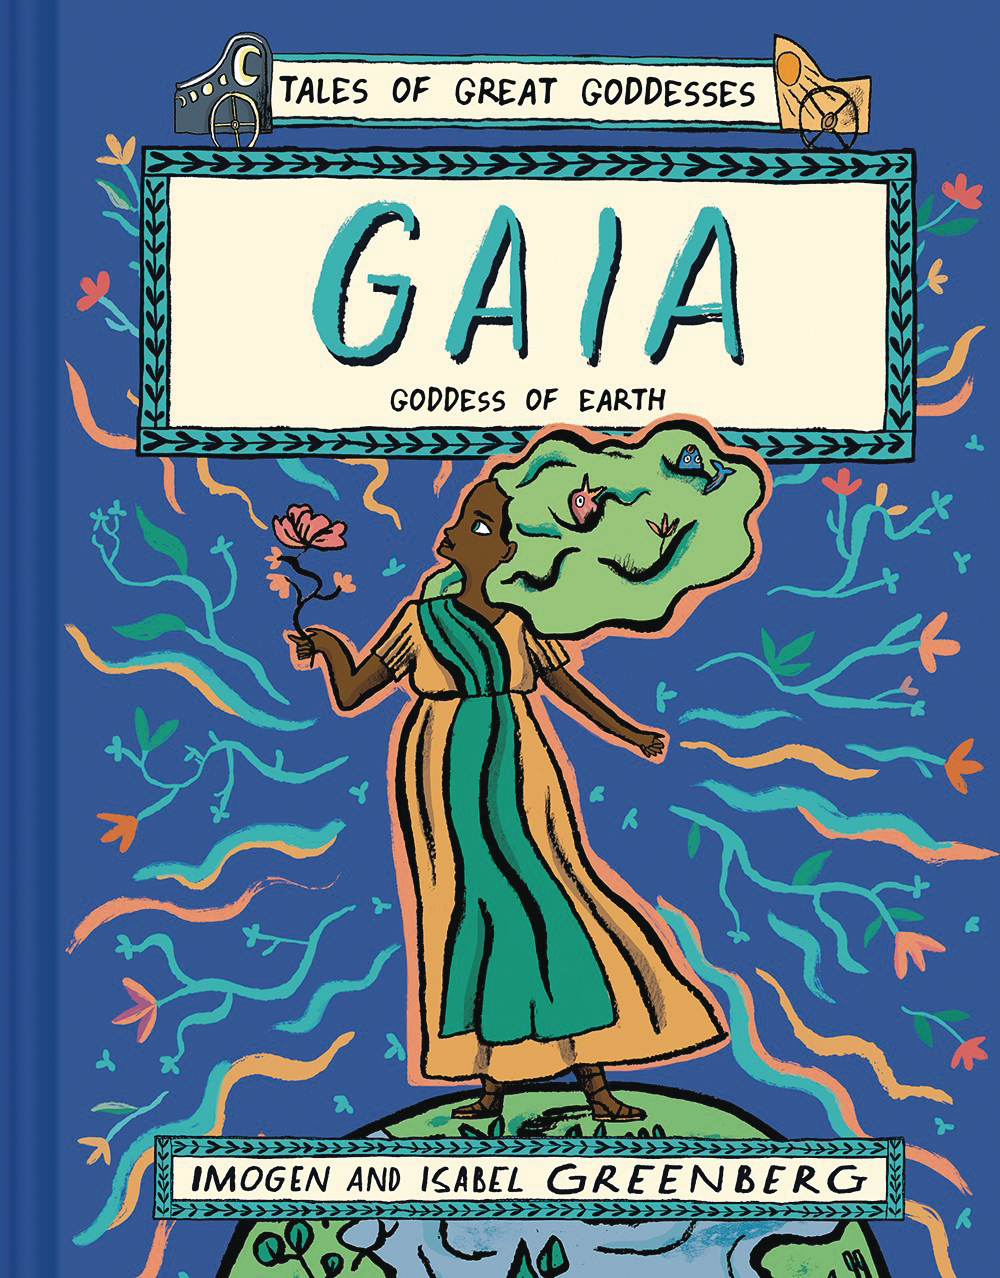 Tales of Great Goddesses Graphic Novel #1 Gaia Goddess of Earth